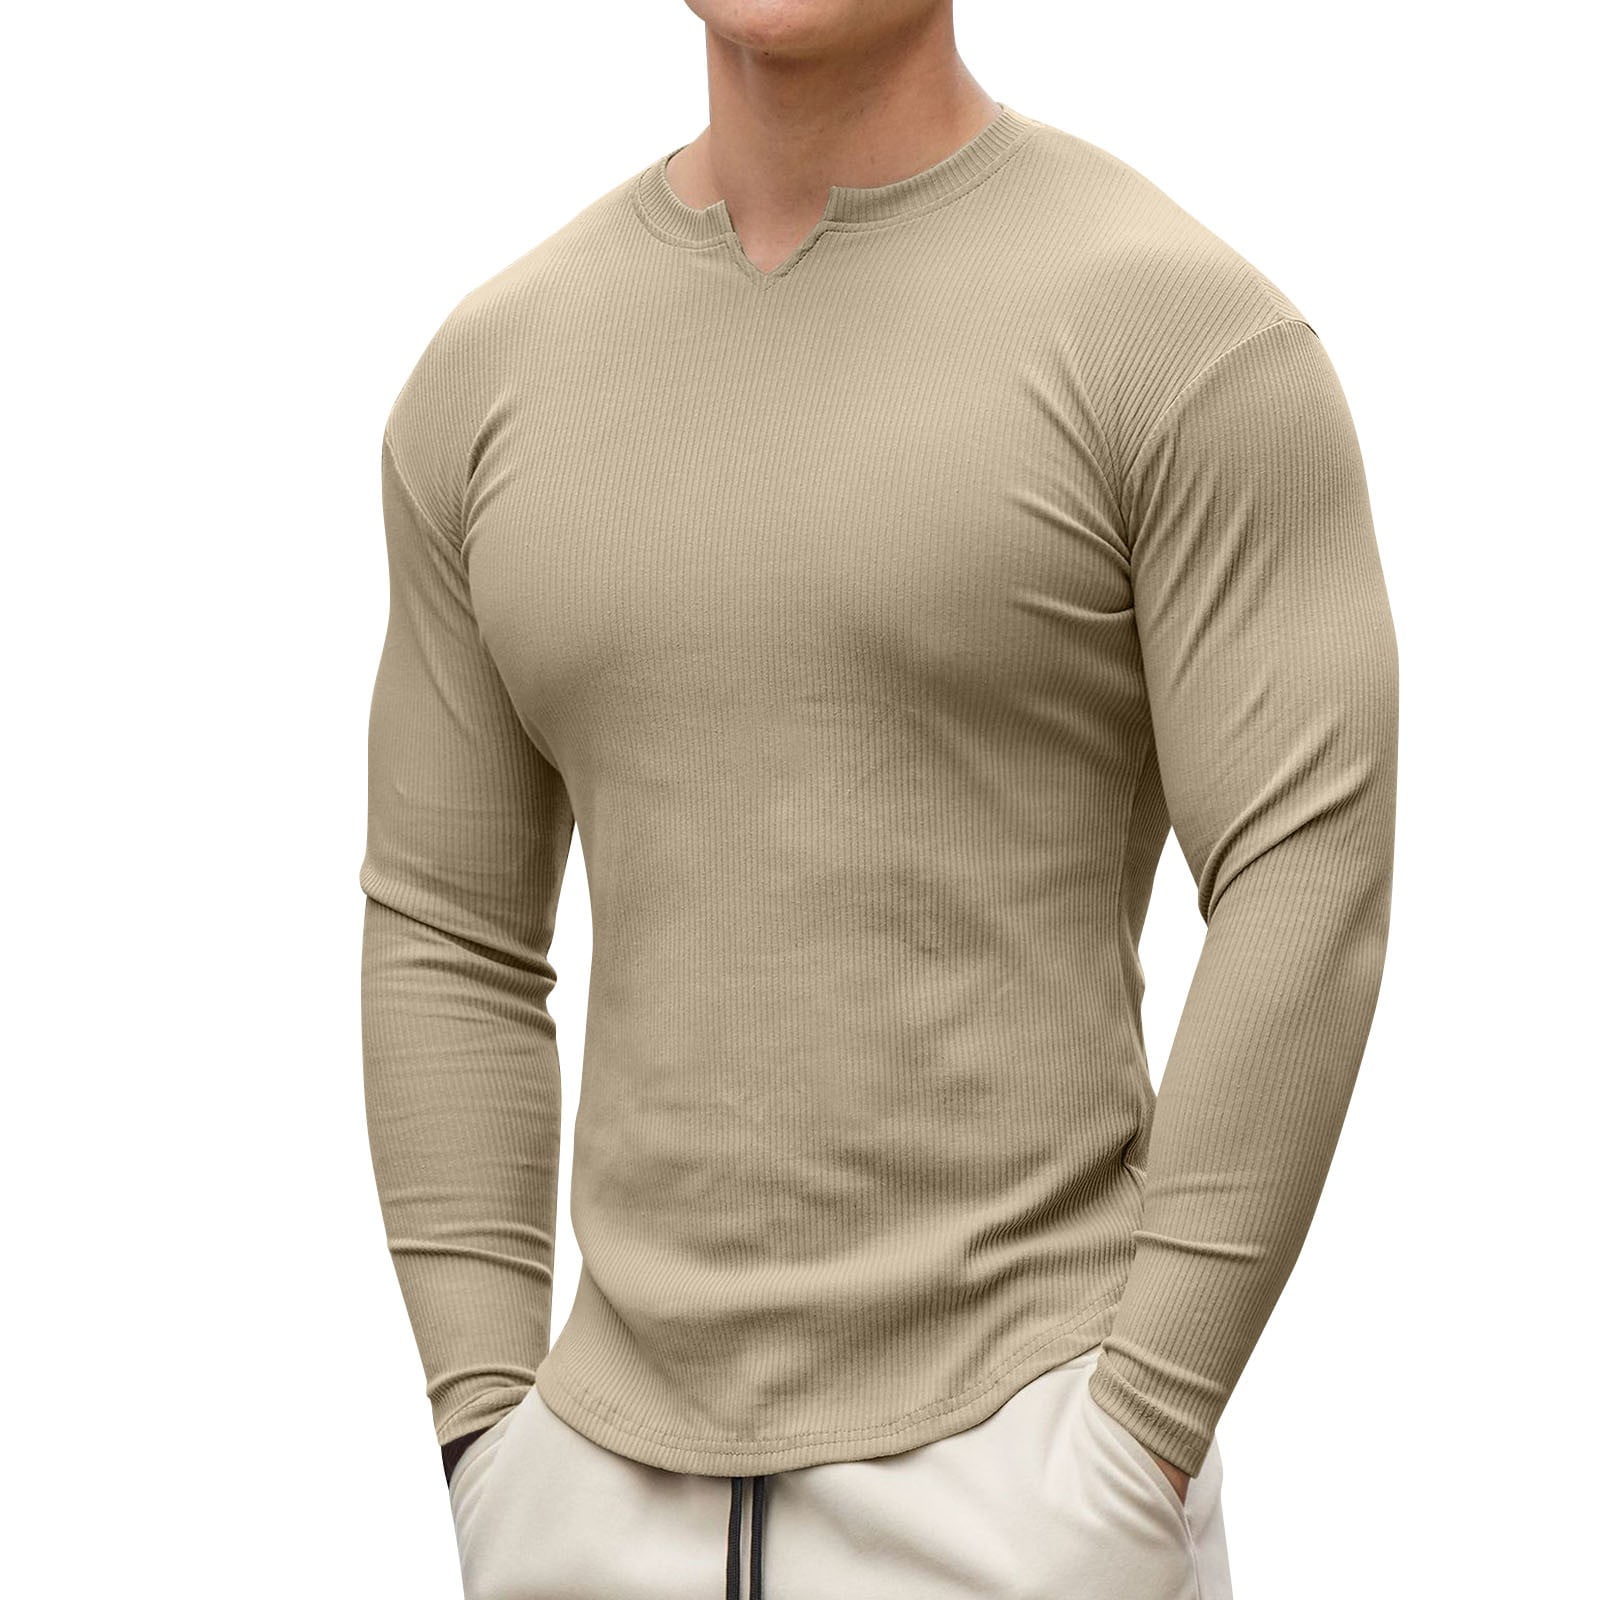 T-Shirt Spring Summer V-Neck Solid Color Long Sleeve Casual Elastic Slim Fit T-Shirts Male Clothes - Walmart.com